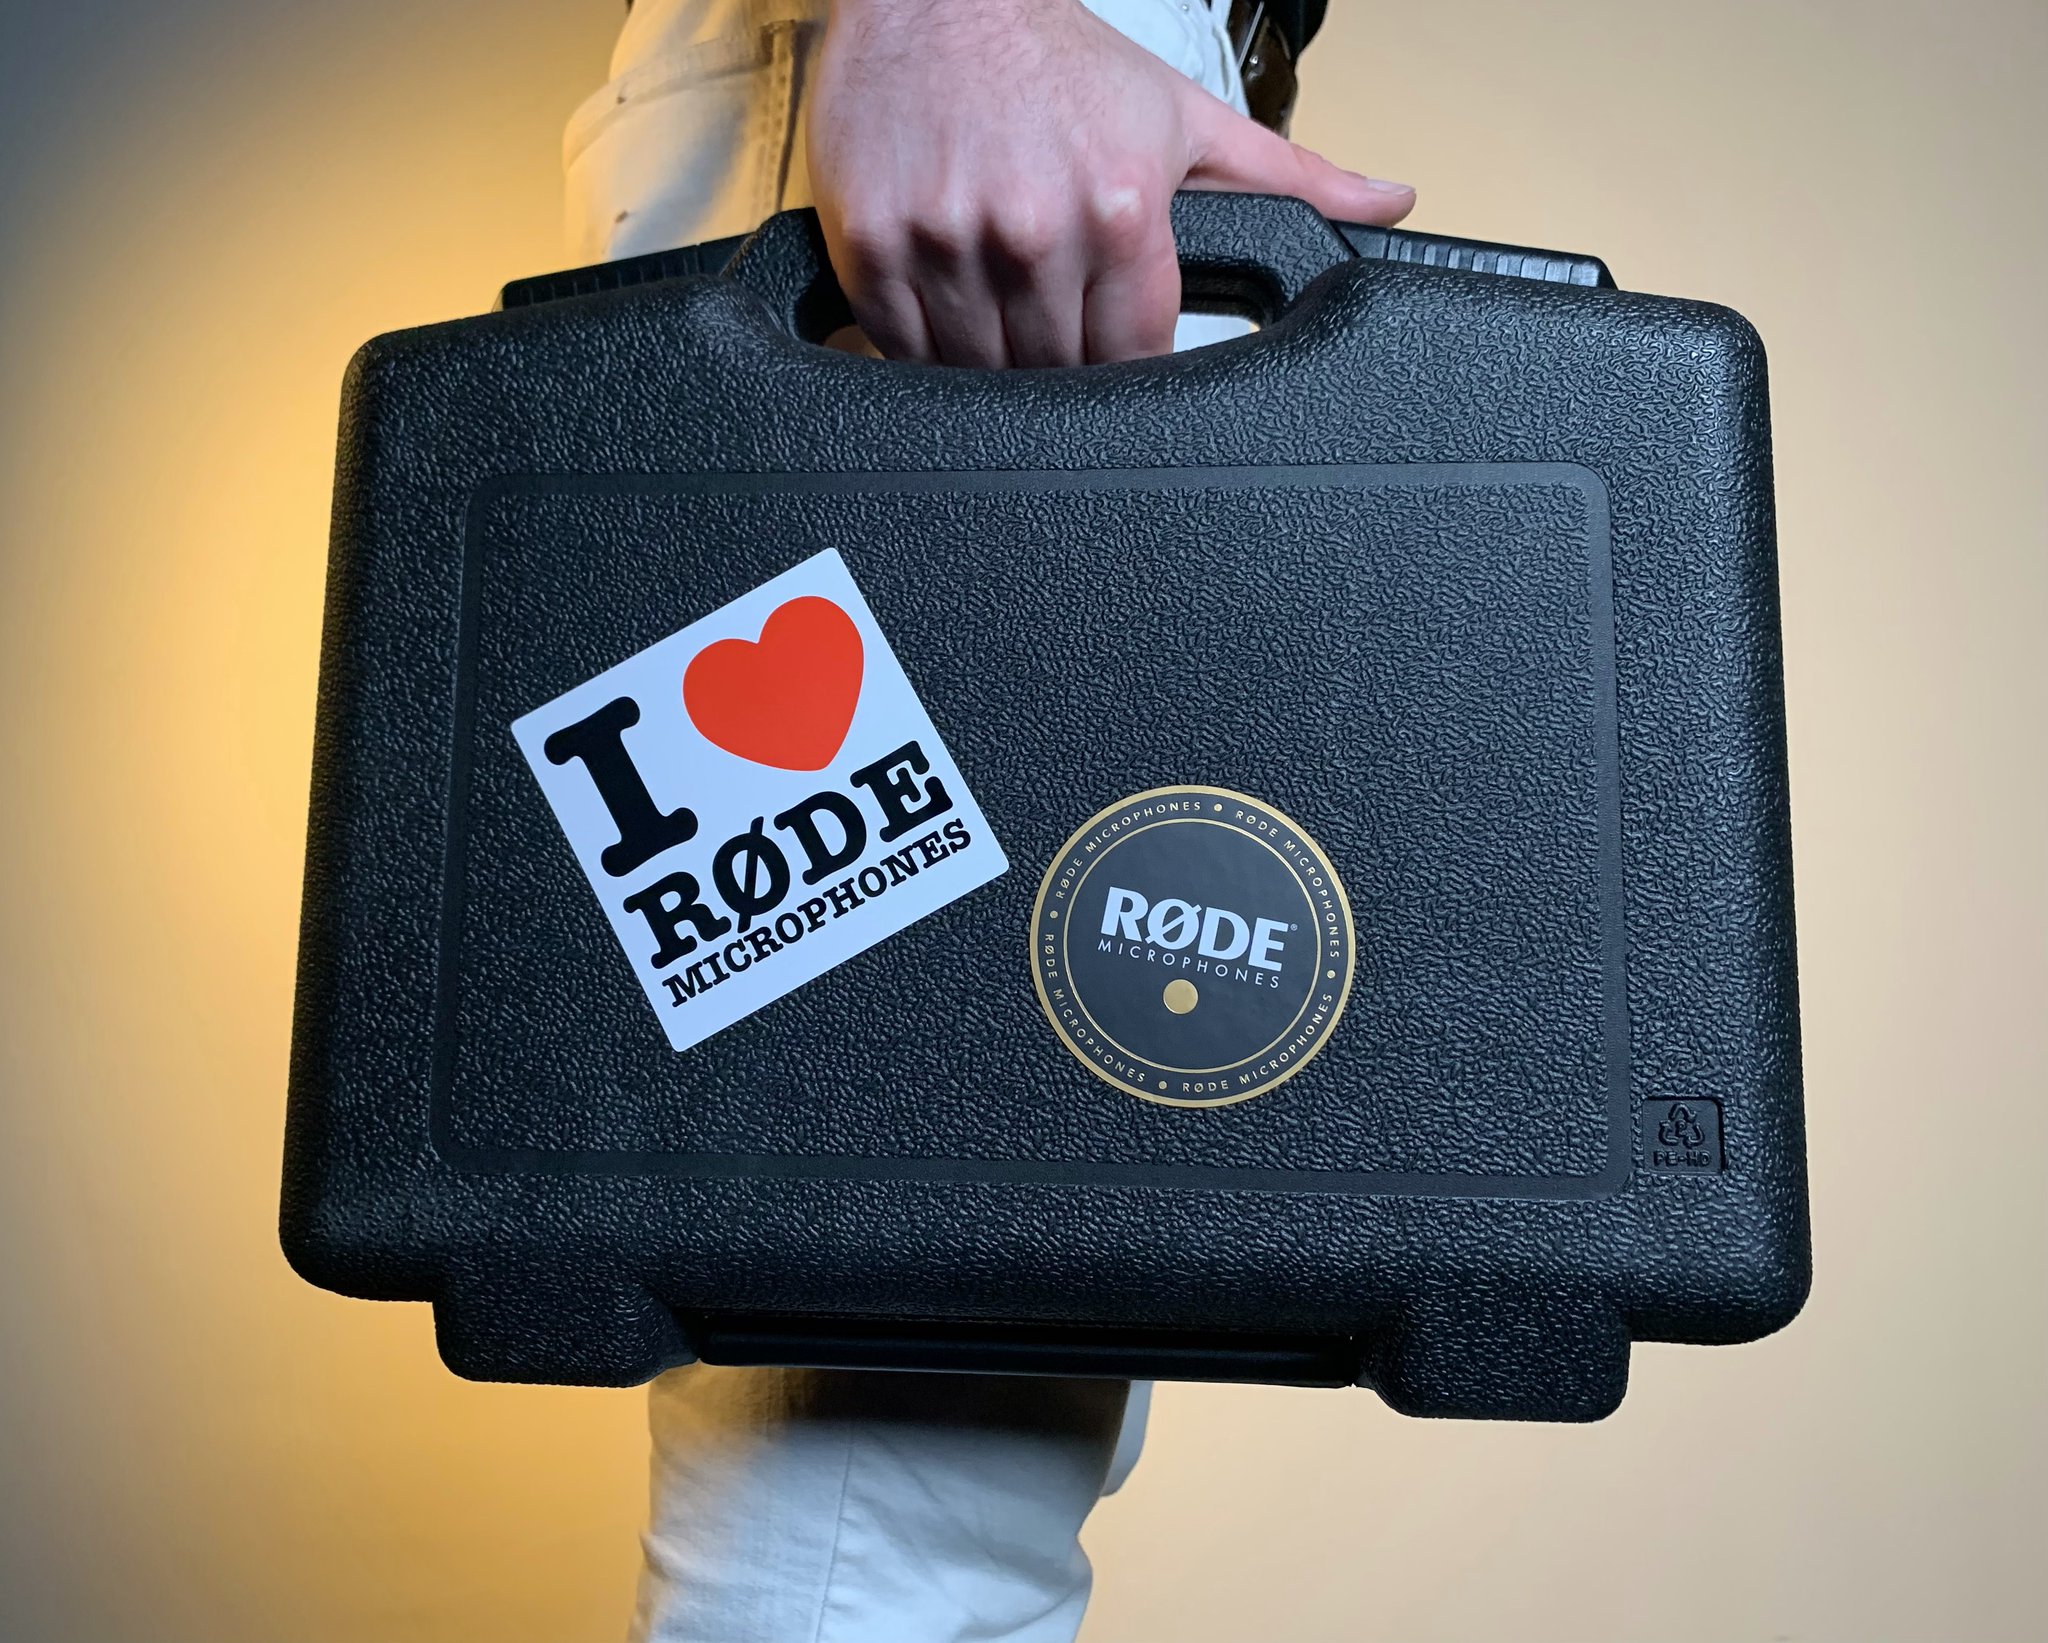 RØDE on Twitter: "#StickerPoll Do you like a sticker when you buy a new so, which sticker do you prefer? The classic 'I ❤️ RØDE Microphones' or the sleek '